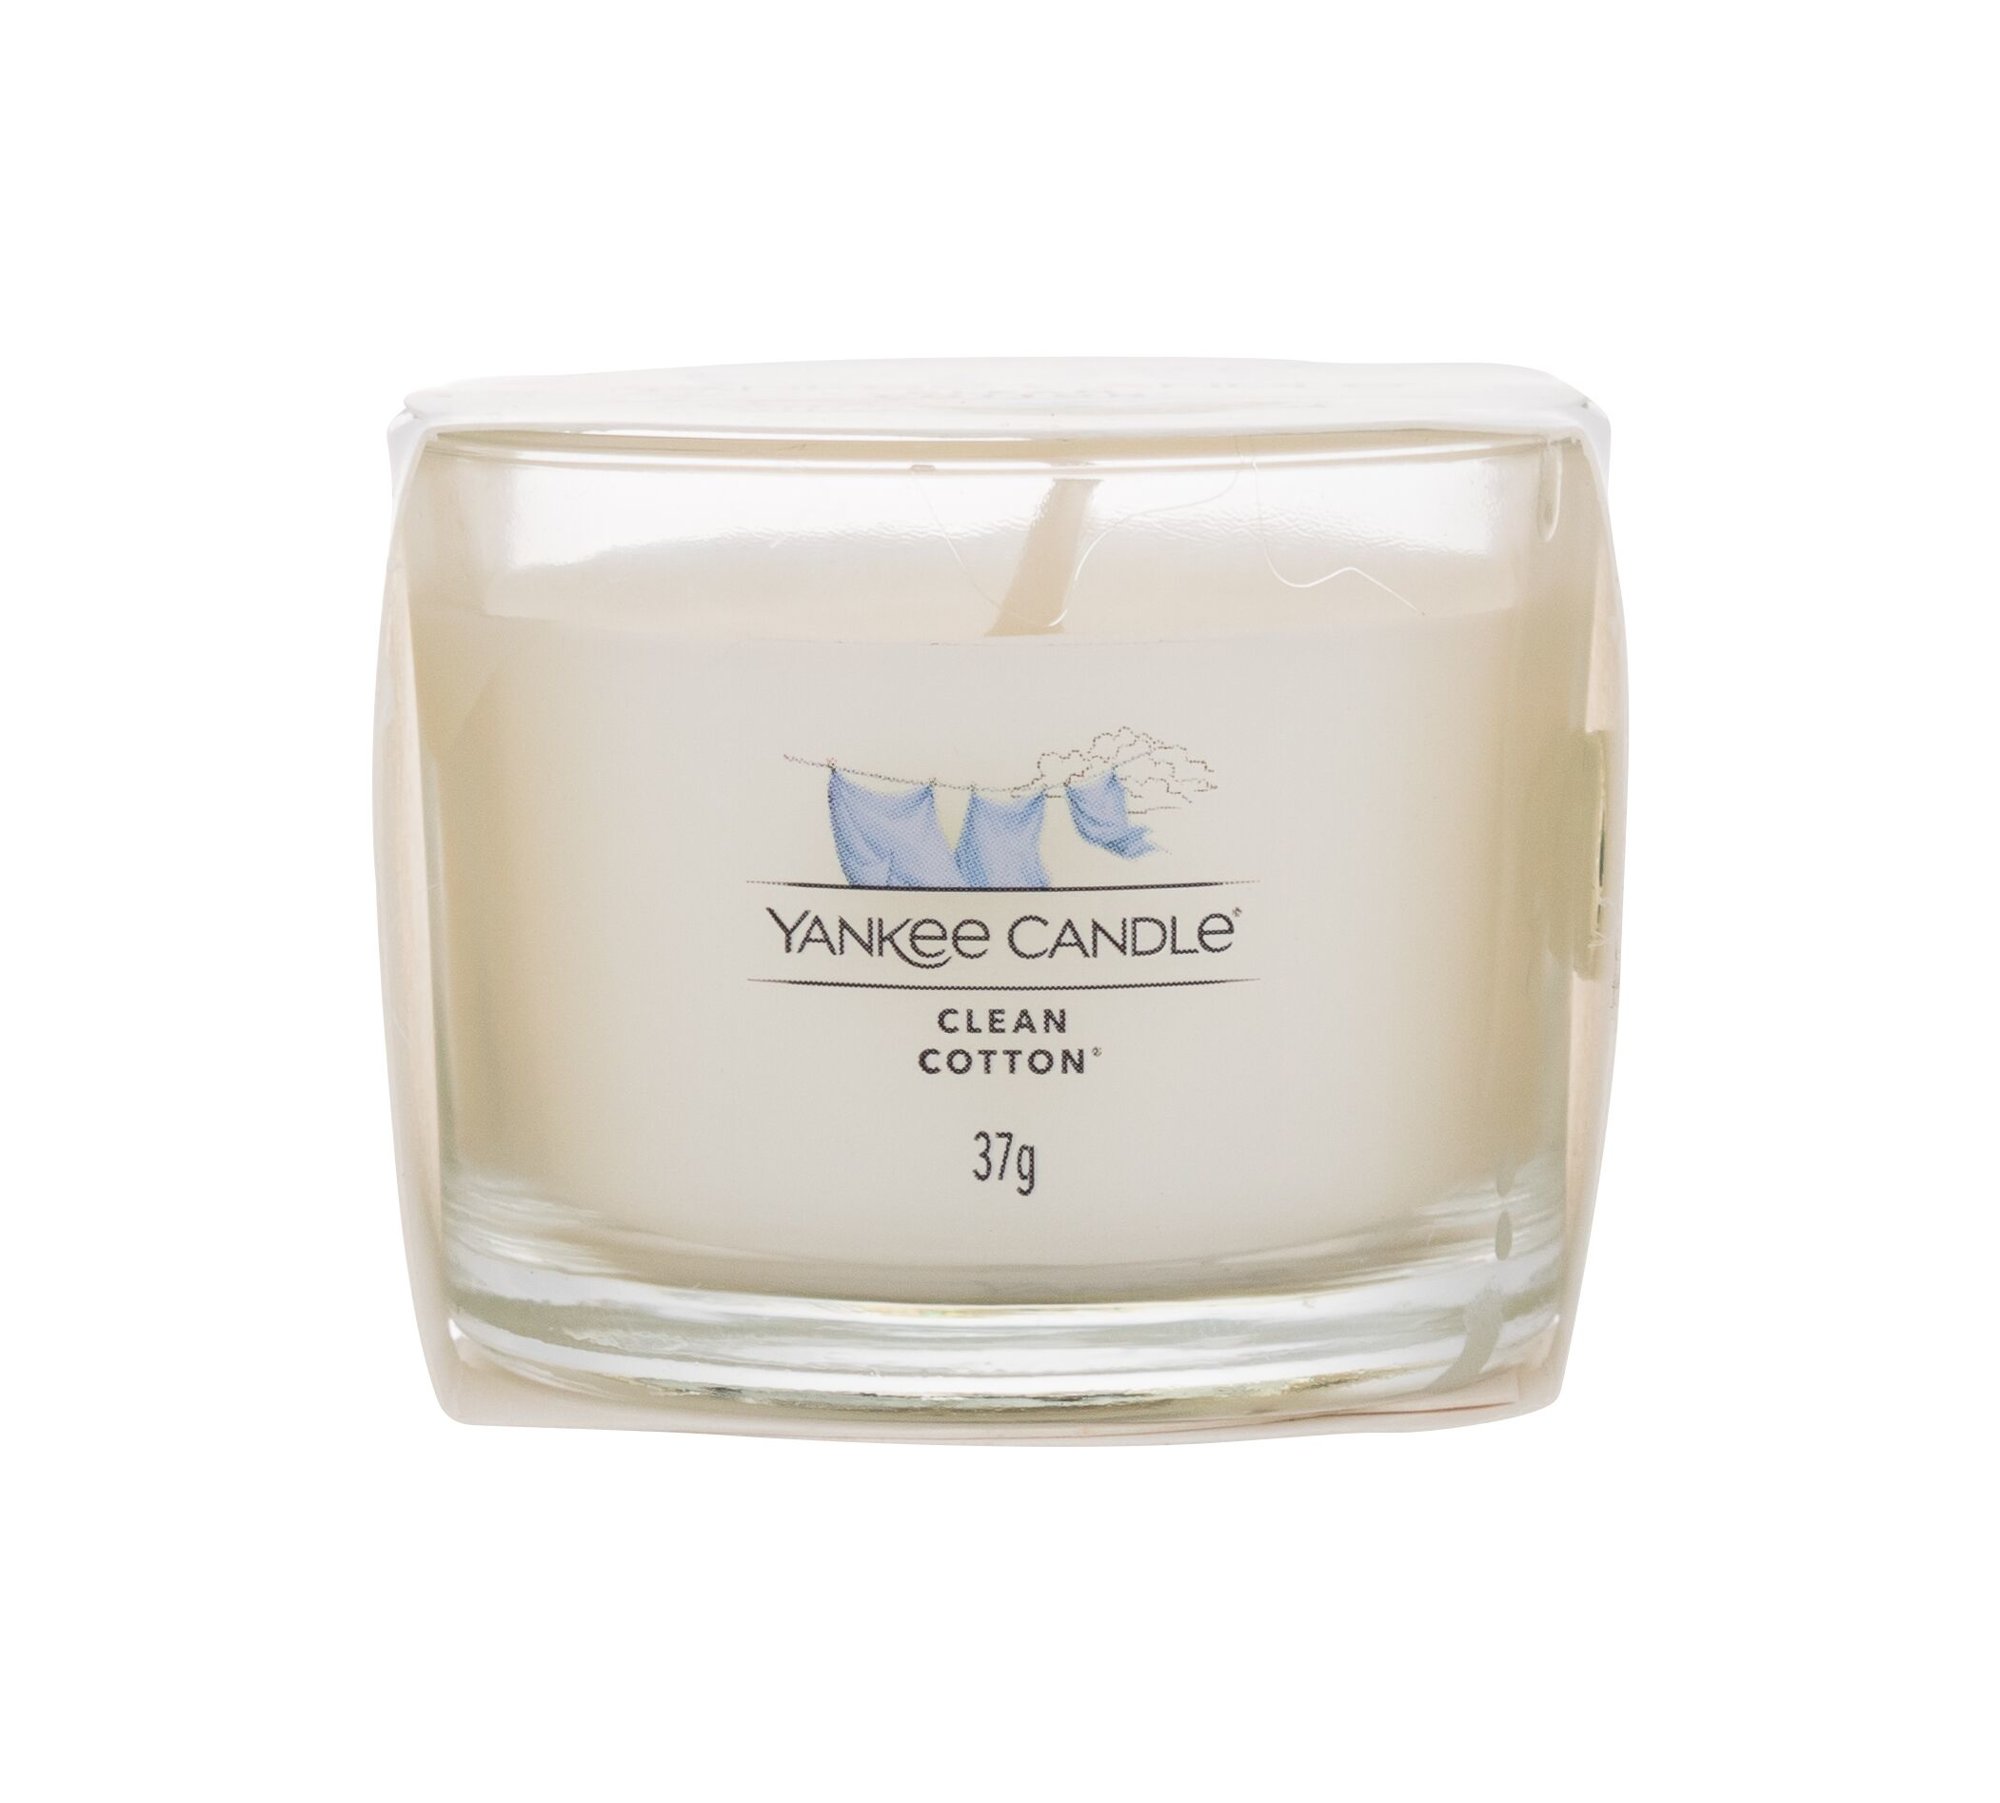 Yankee Candle Clean Cotton 37g Kvepalai Unisex Scented Candle